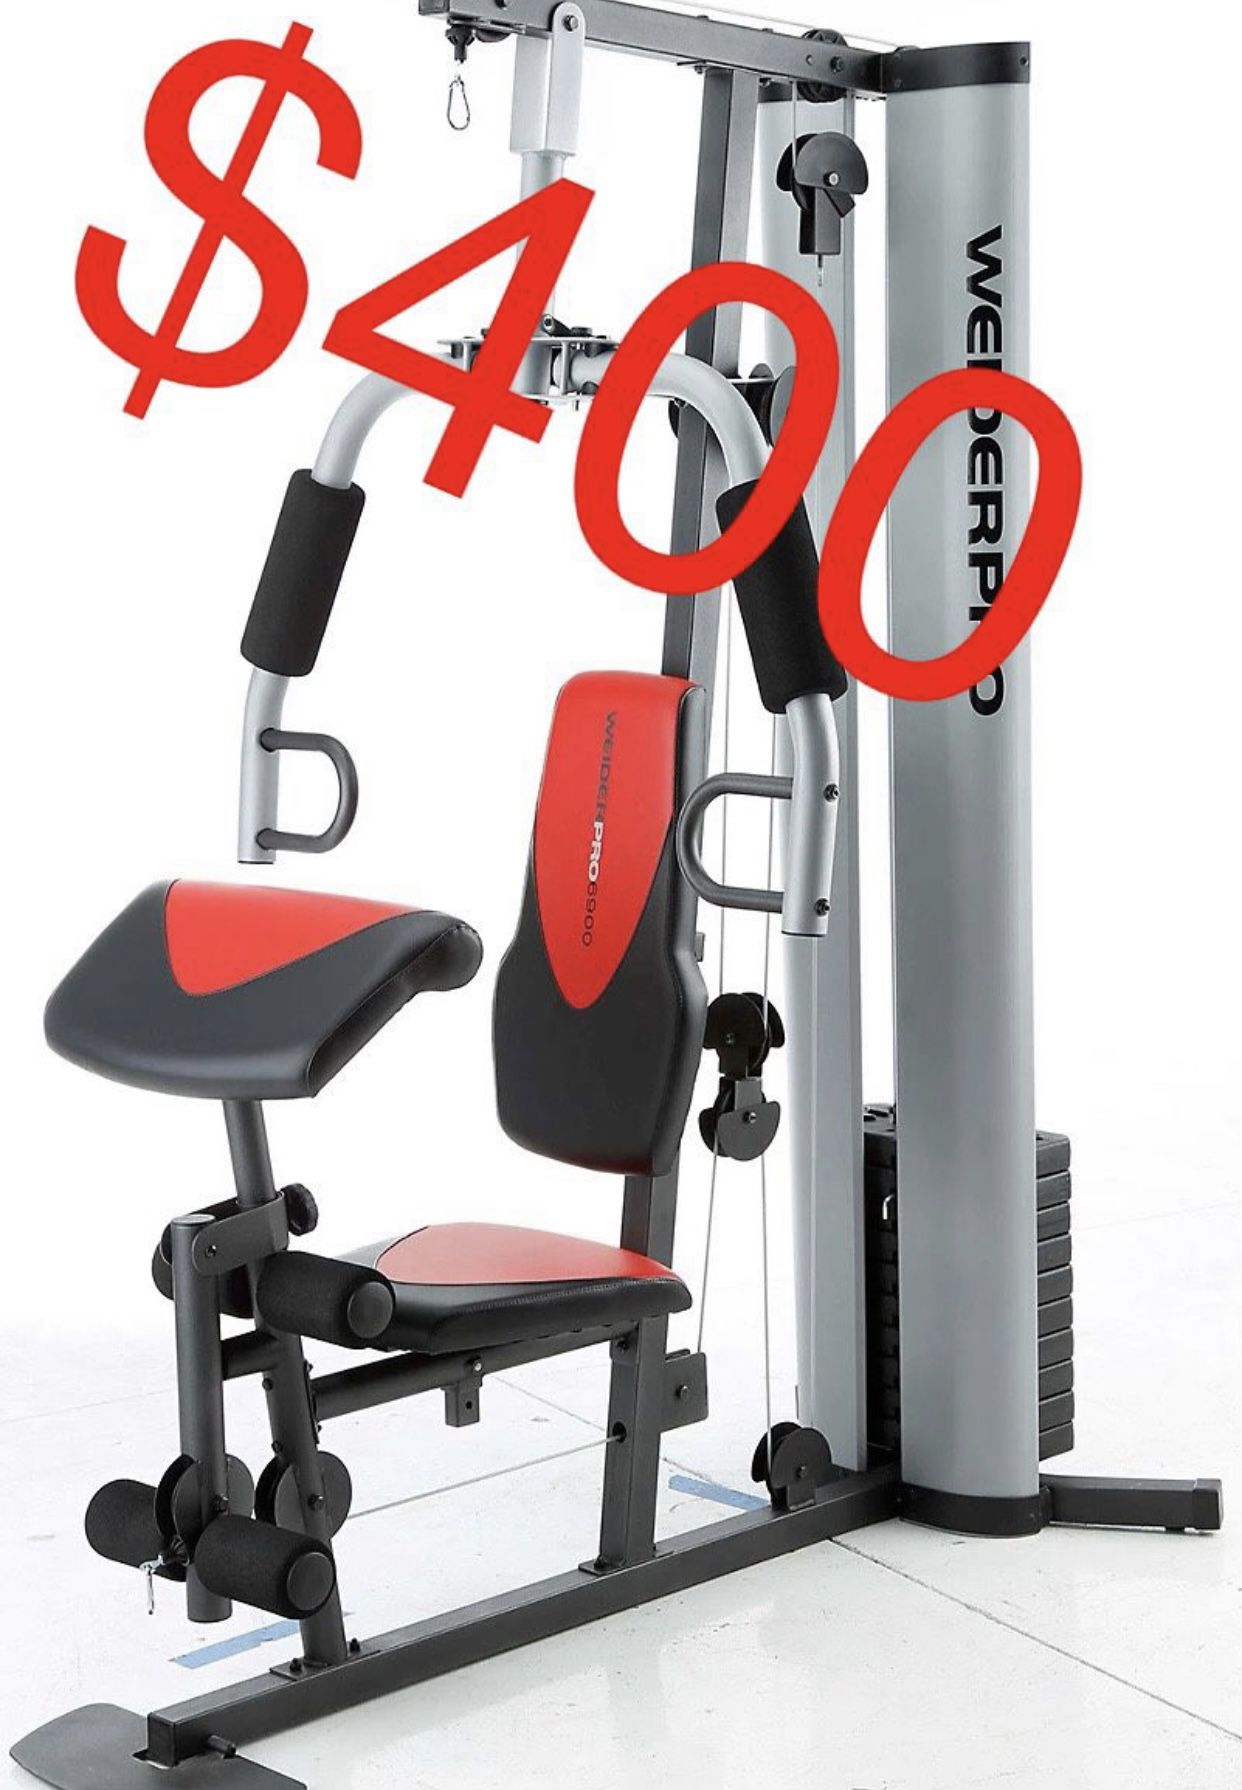 Weider Home Gym 120lbd Resistance Up To 300 Back Biceps Legs Chest Flys Lats Cable Triceps Machine New